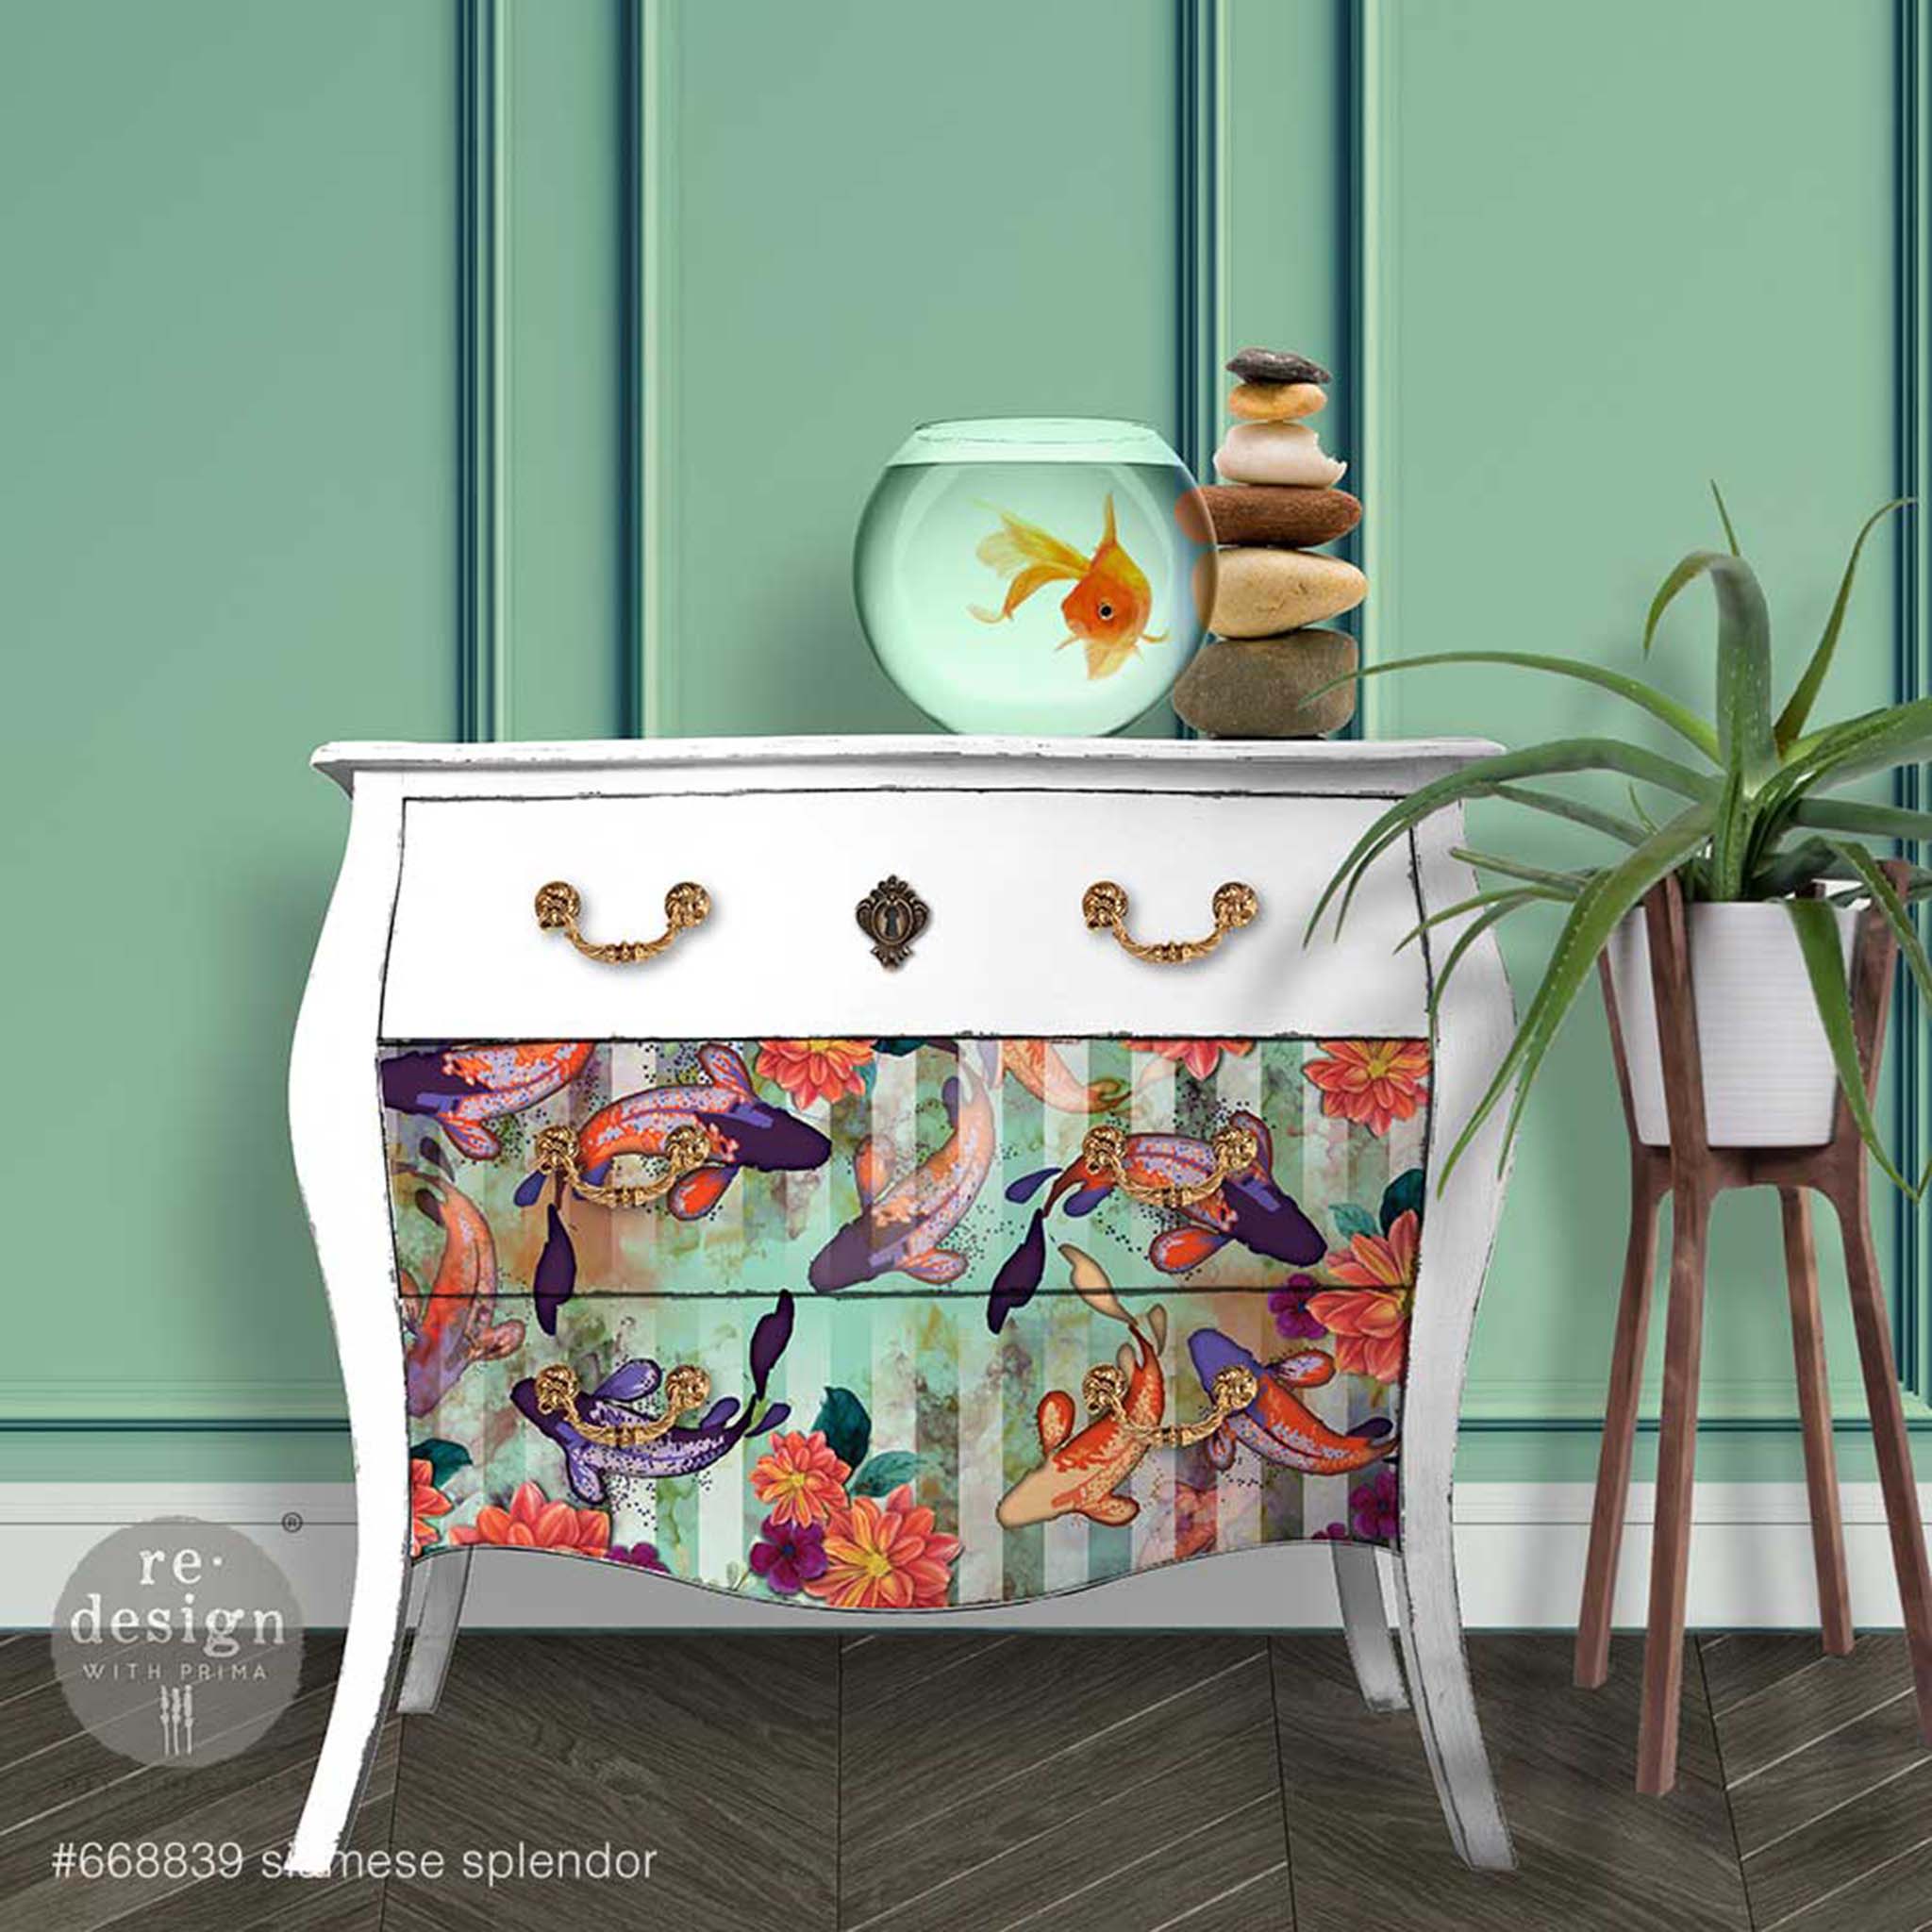 A vintage 3-drawer Bombay dresser is painted white and features ReDesign with Prima's Siamese Splendor tissue paper on its bottom 2 drawers.